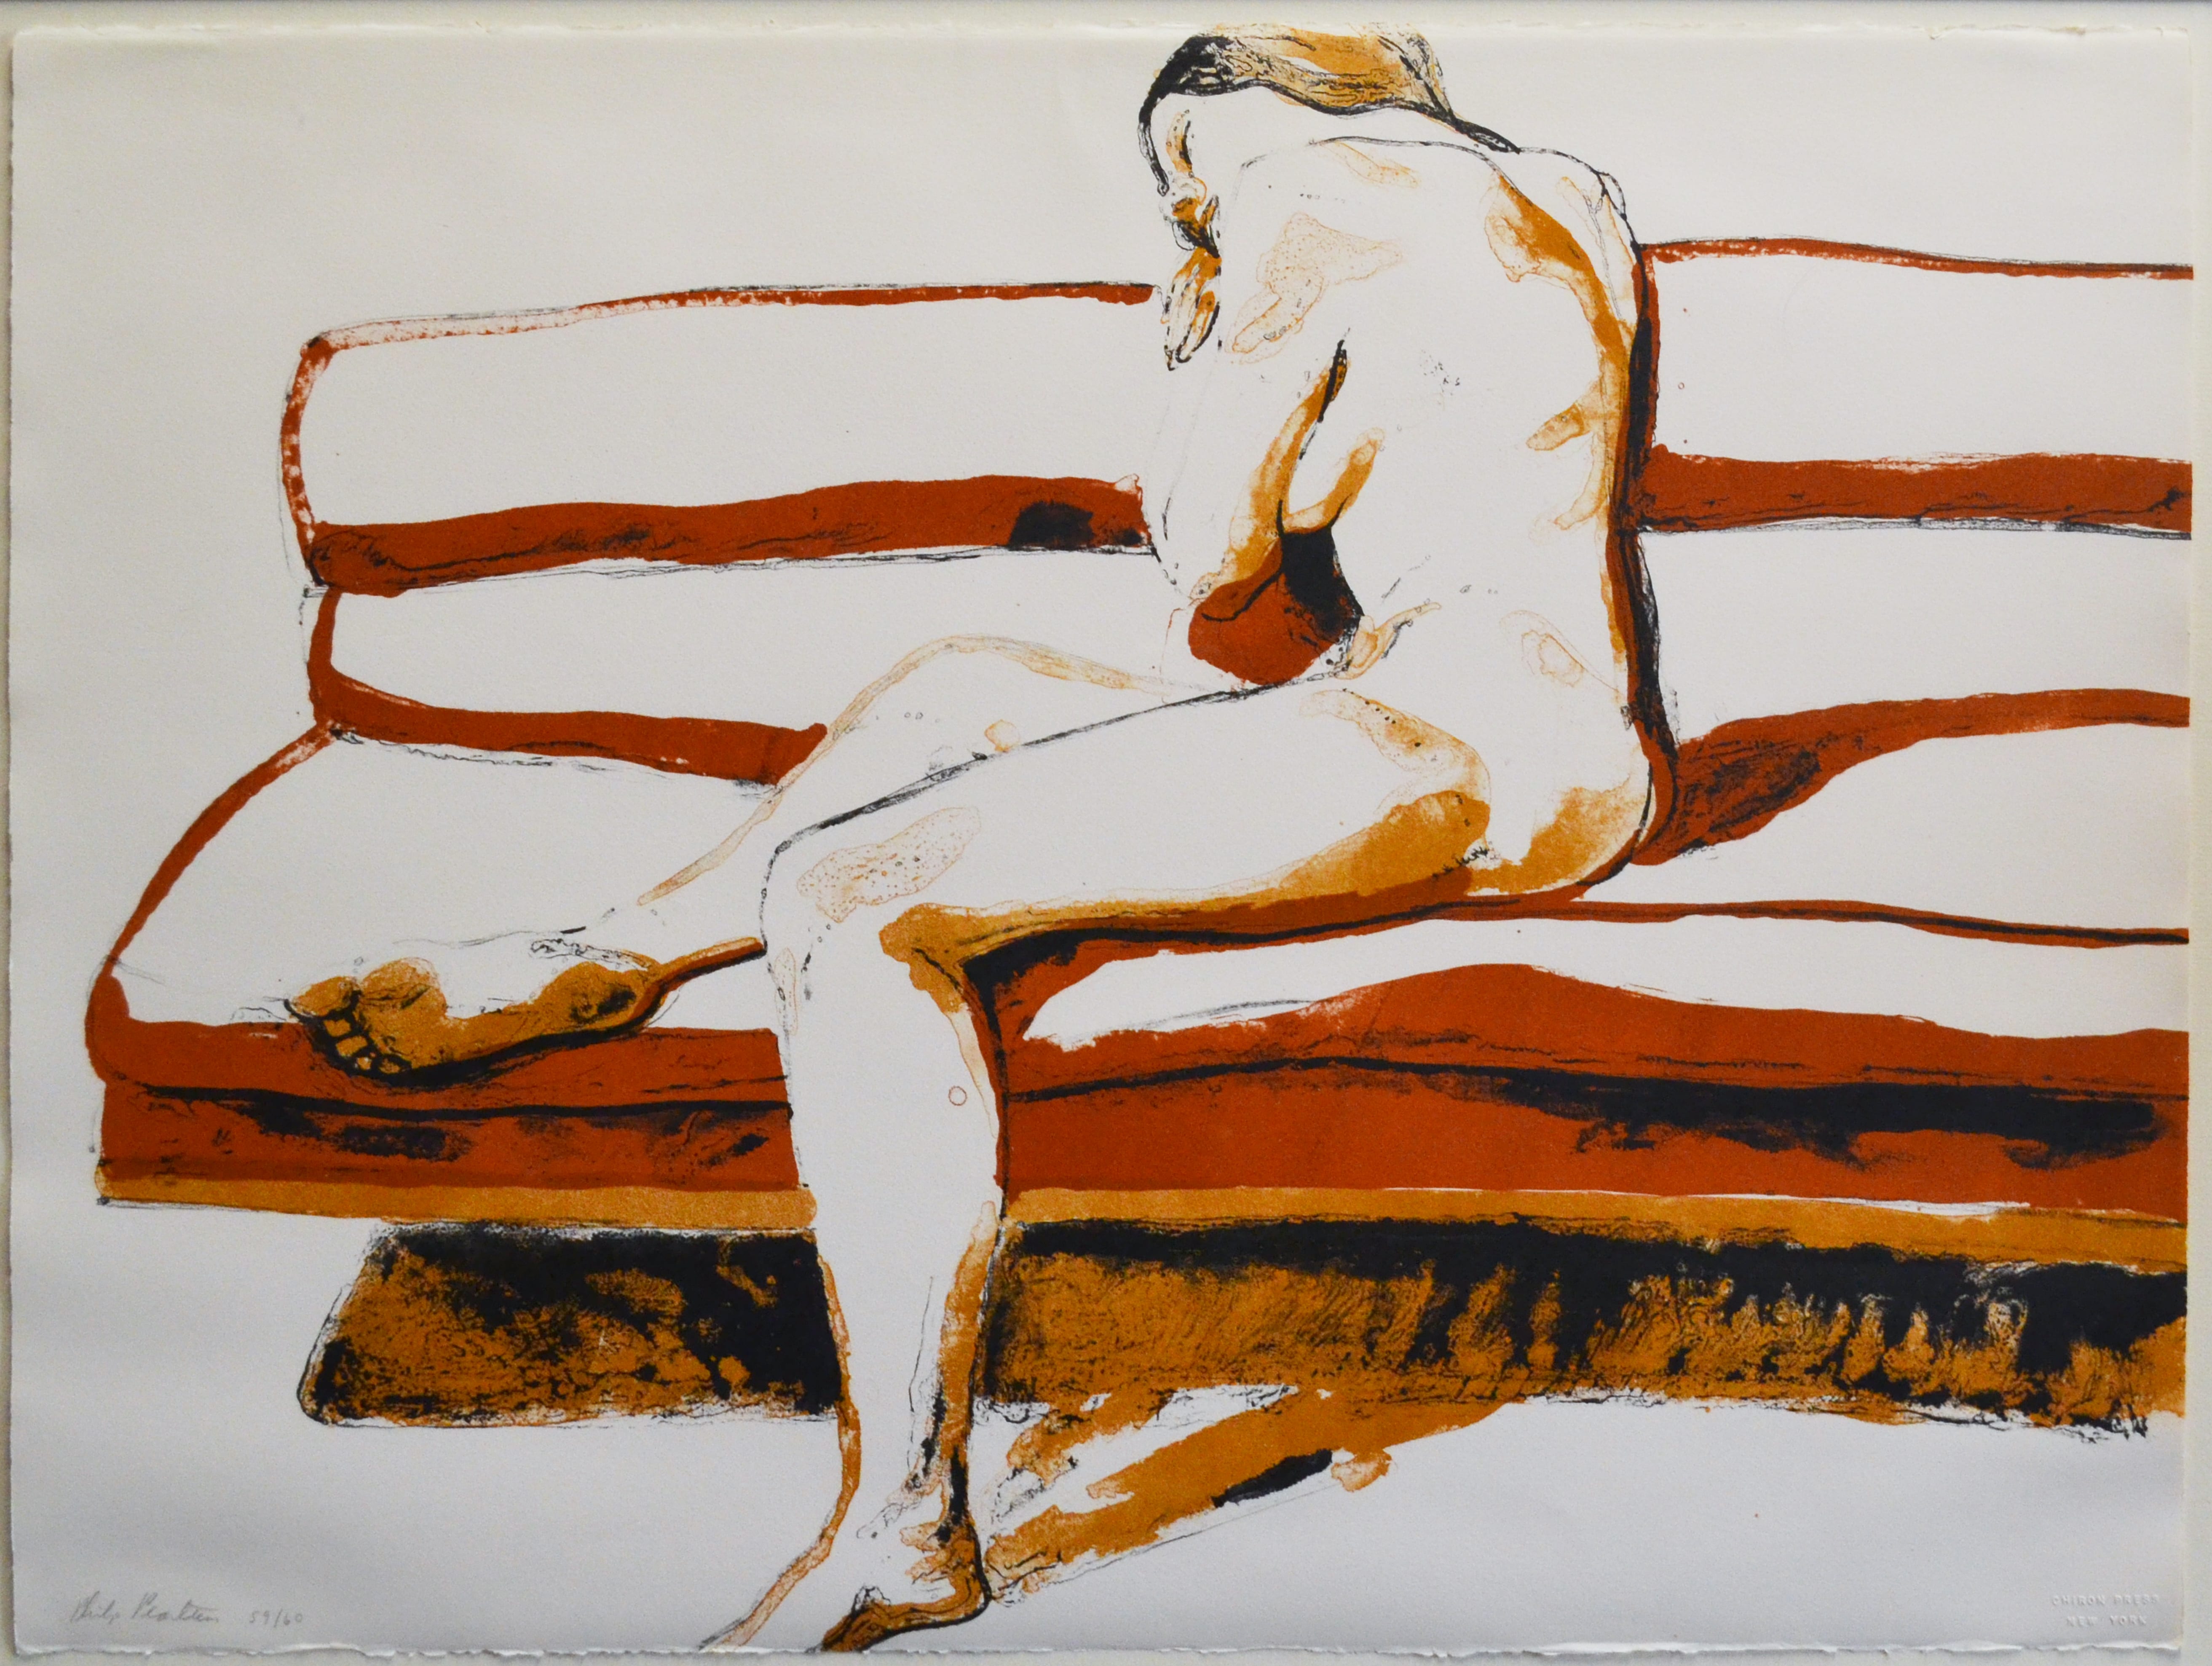 Lot 016: Philip Pearlstein "Nude on Couch" Lithograph